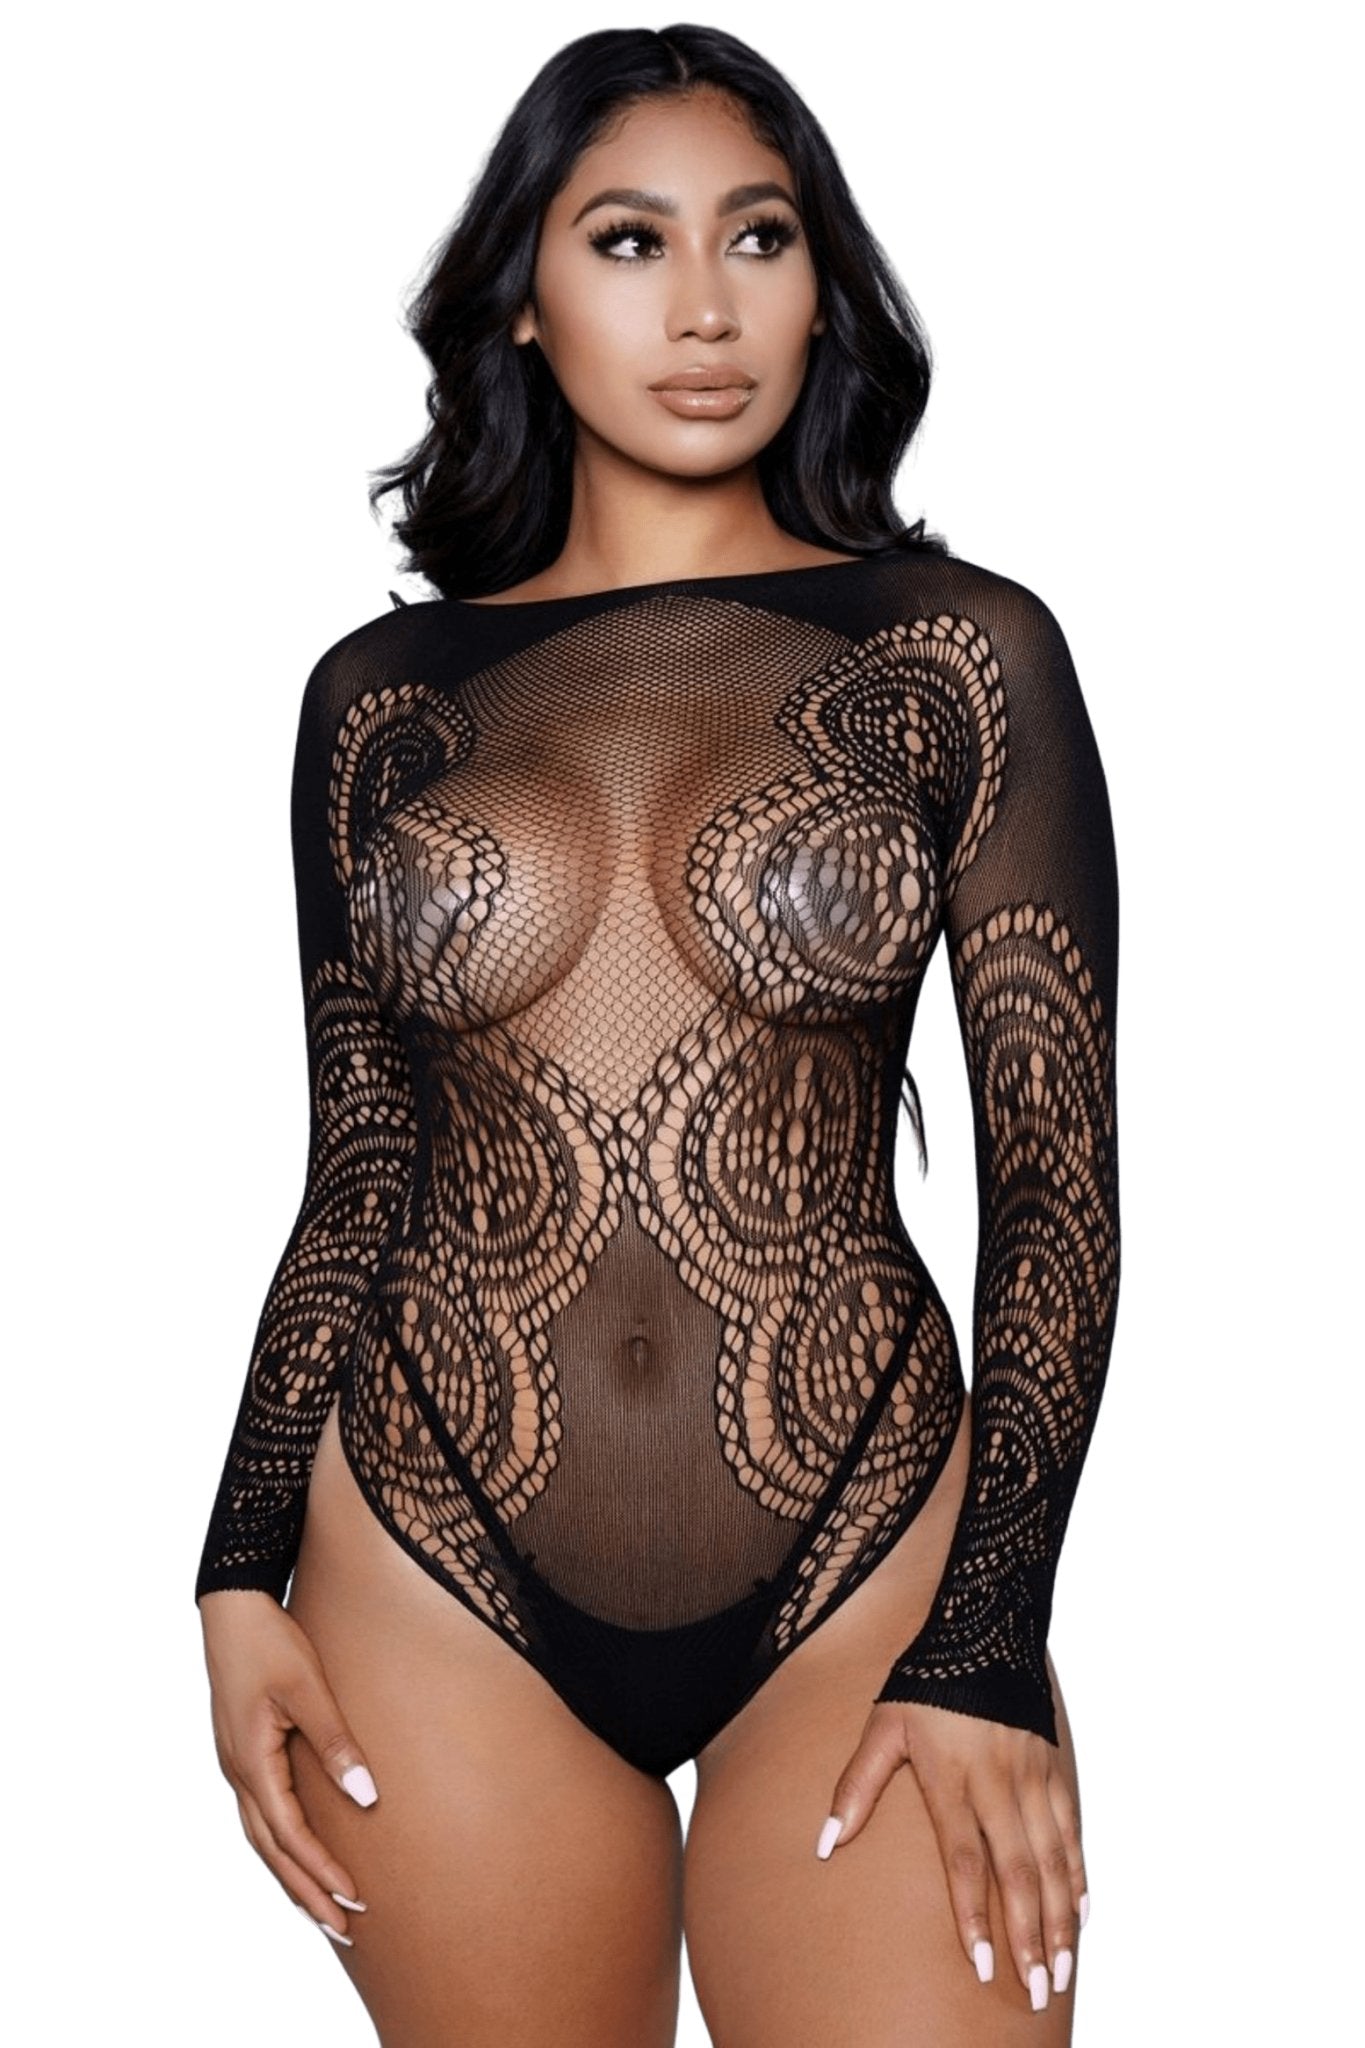 Sheer and Sexy Bodysuit Musotica.com